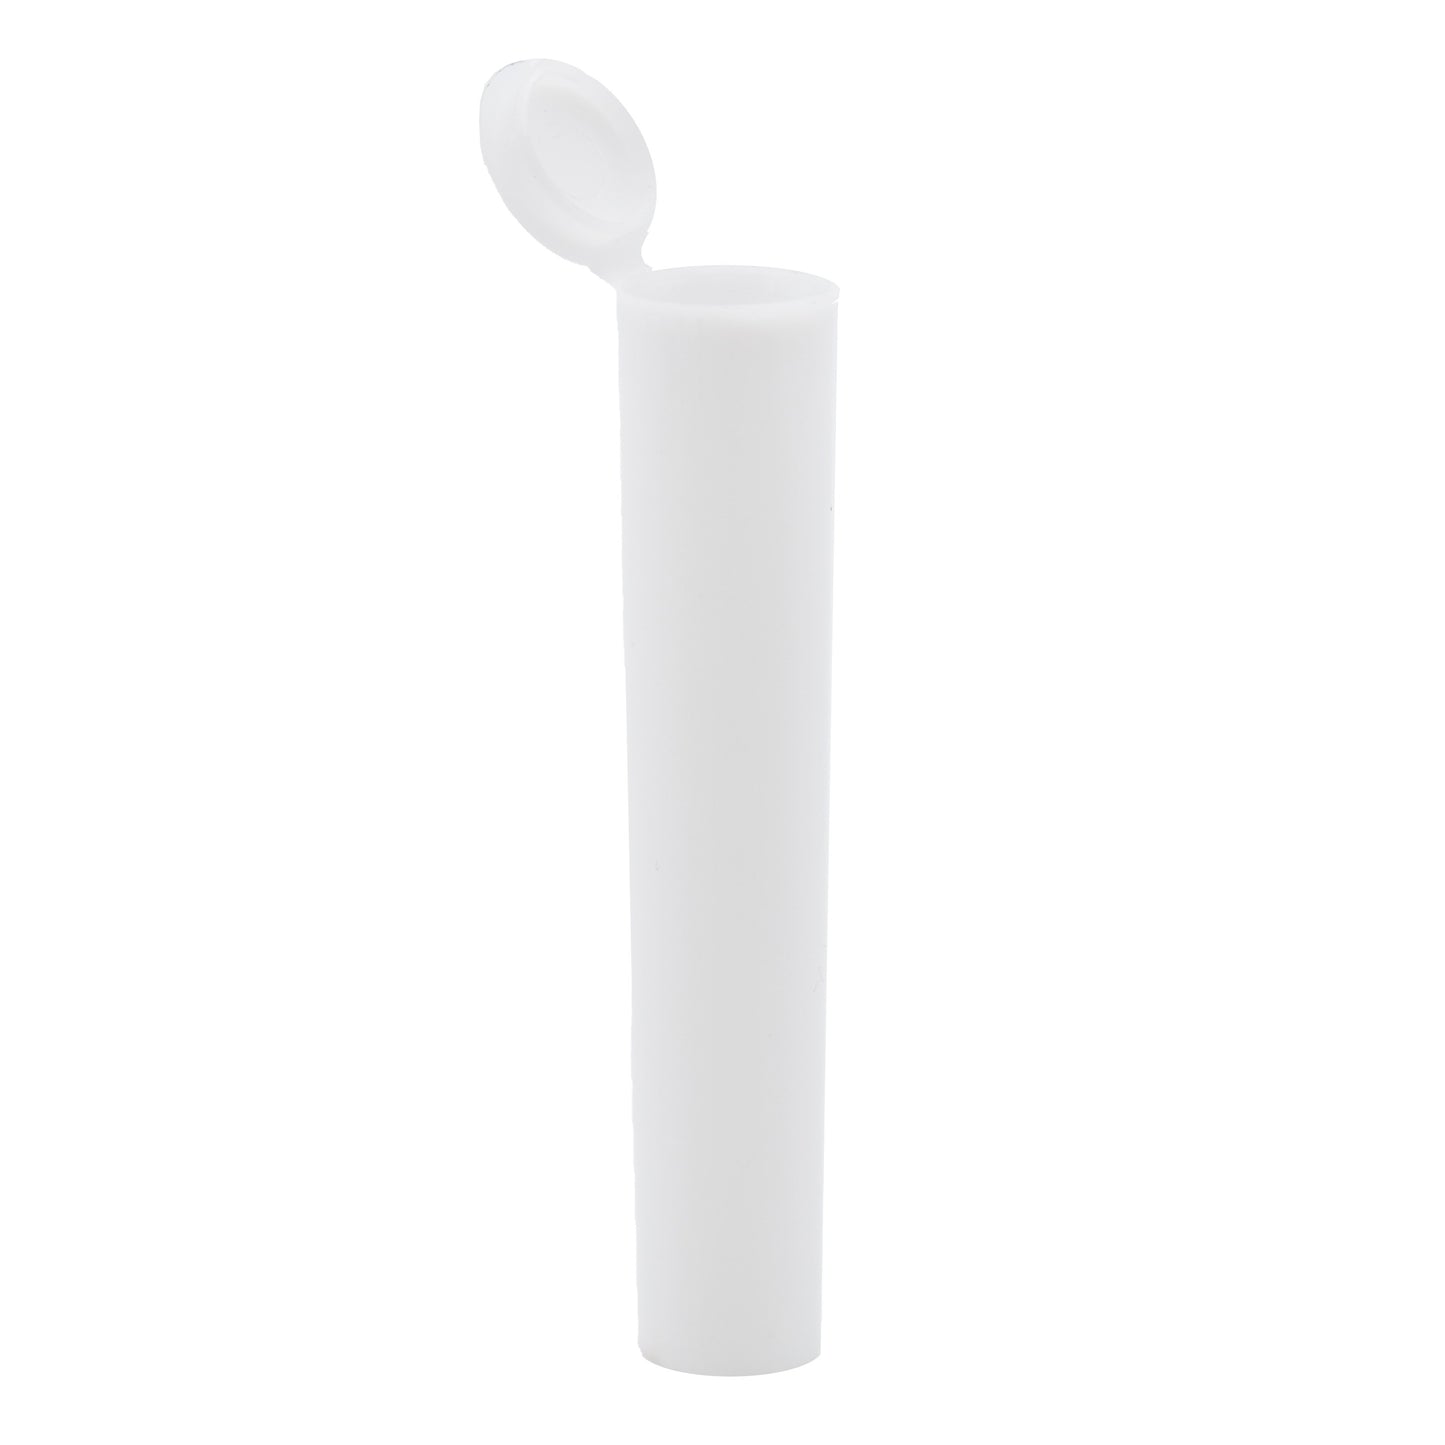 Brand King Squeeze Pop Top Plastic Tube for Cartridge (85mm) White